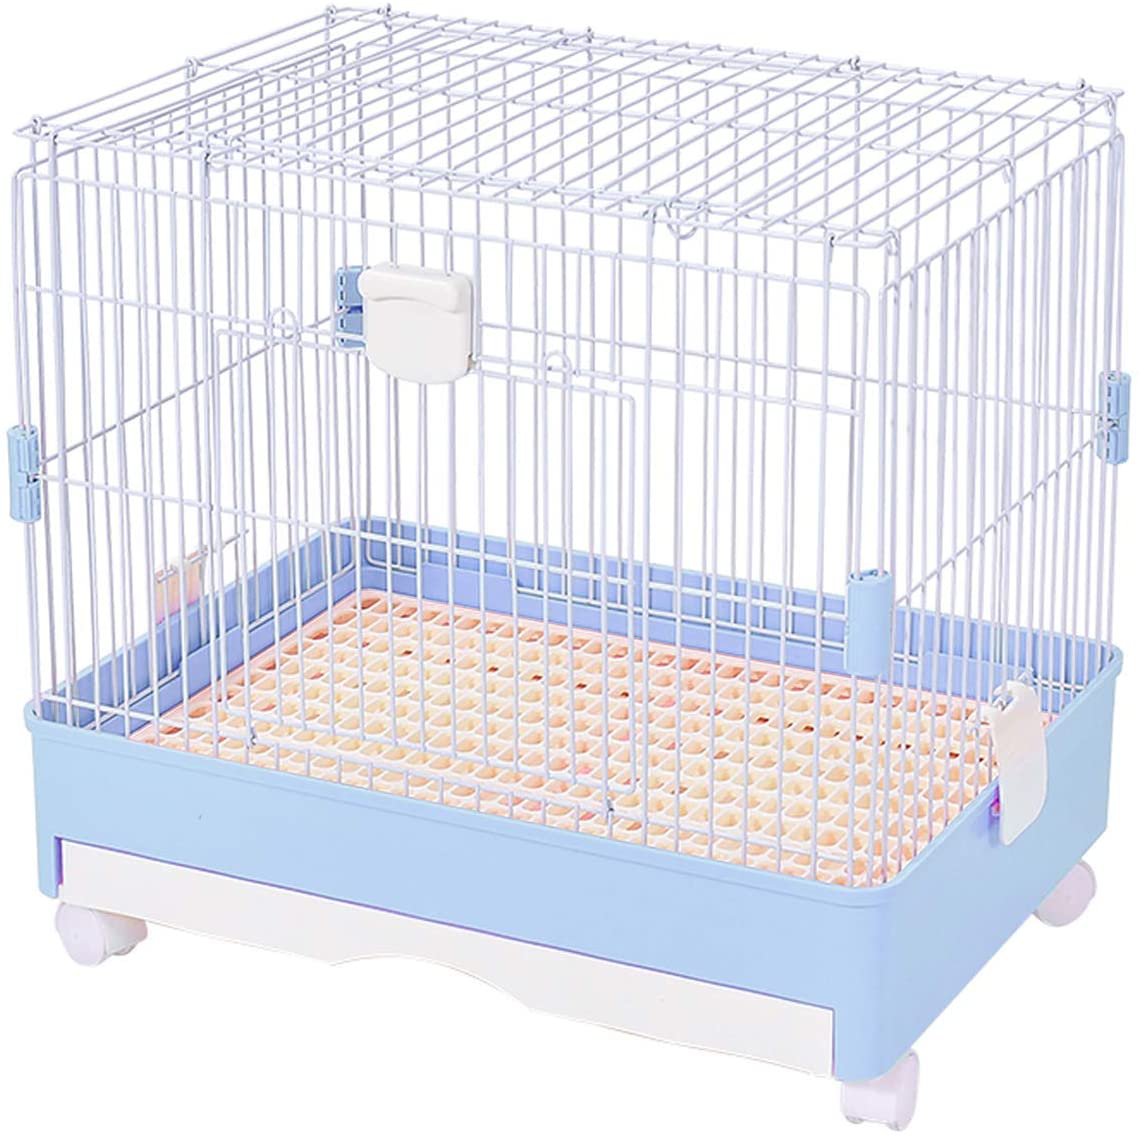 Kathson Hamster Cage, Guinea Pig Large Hutch Habitat, Small Animal Cage for Hamster Chinchilla Gerbils Mice, Includes Wheels (Blue)